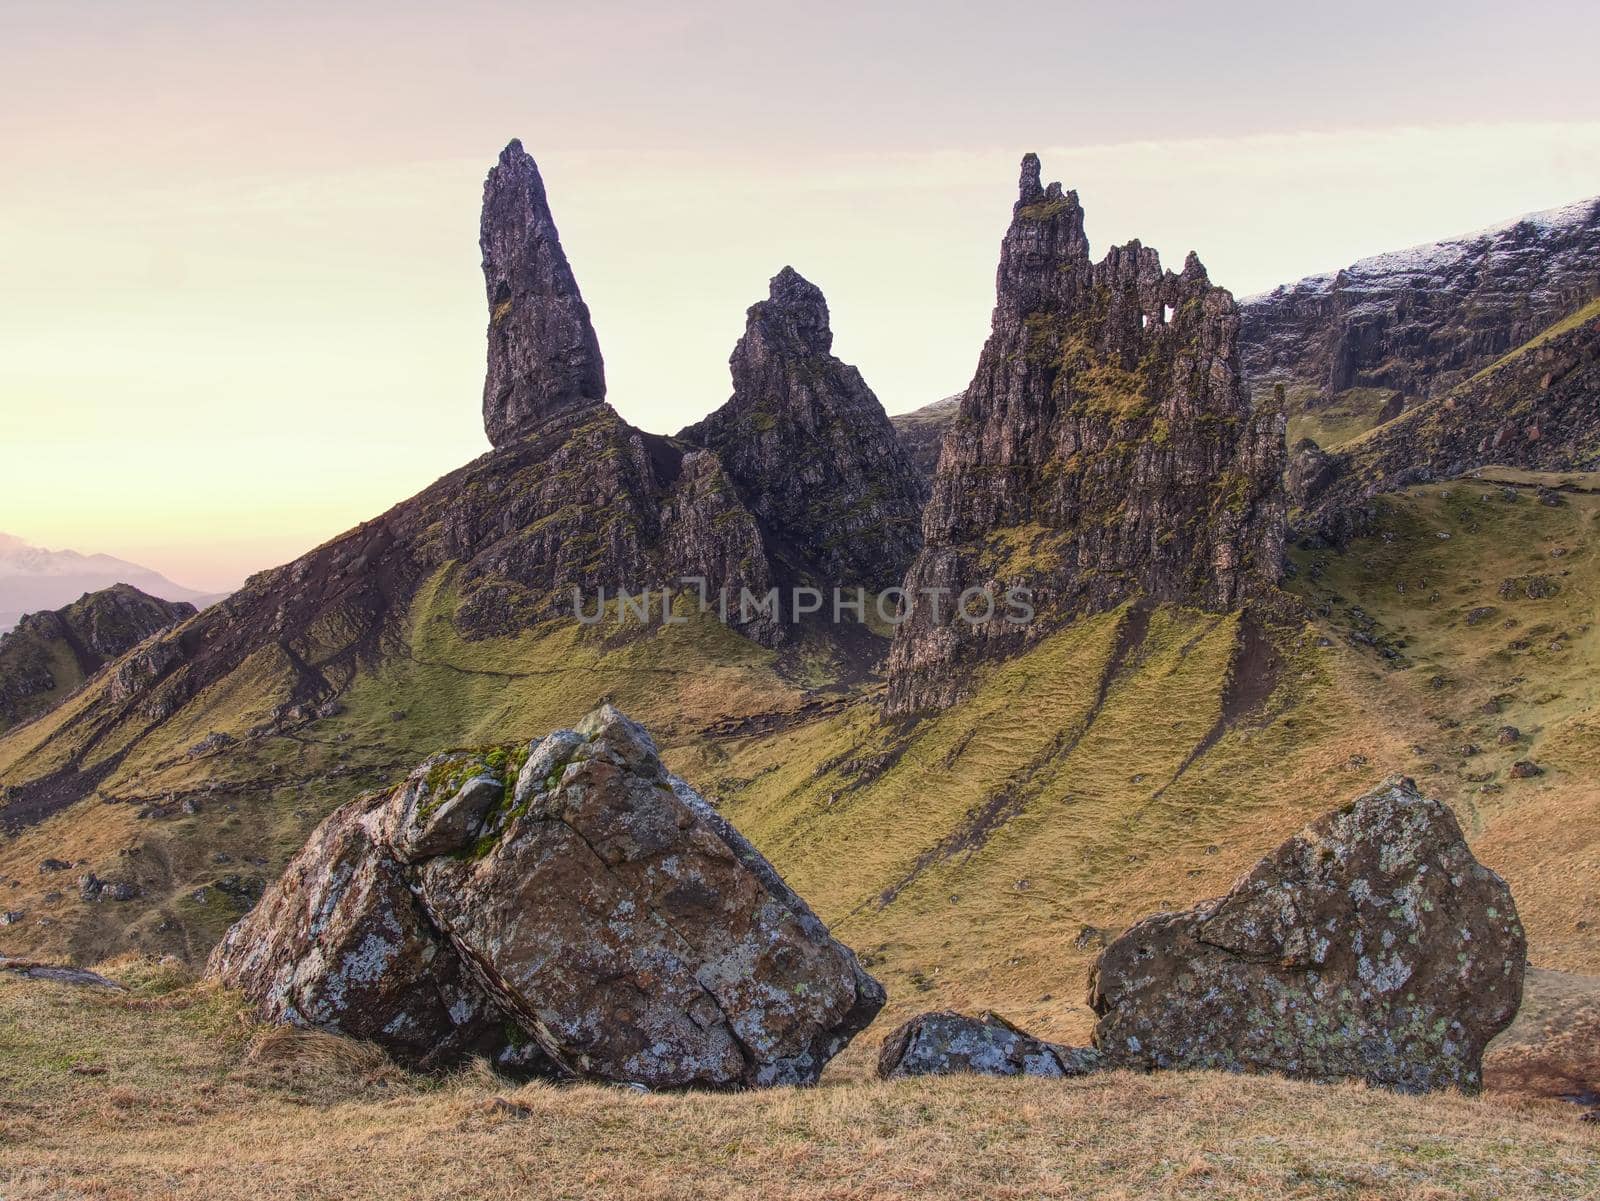 The Old Man of Storr is one of the most photographed wonders in the world. by rdonar2